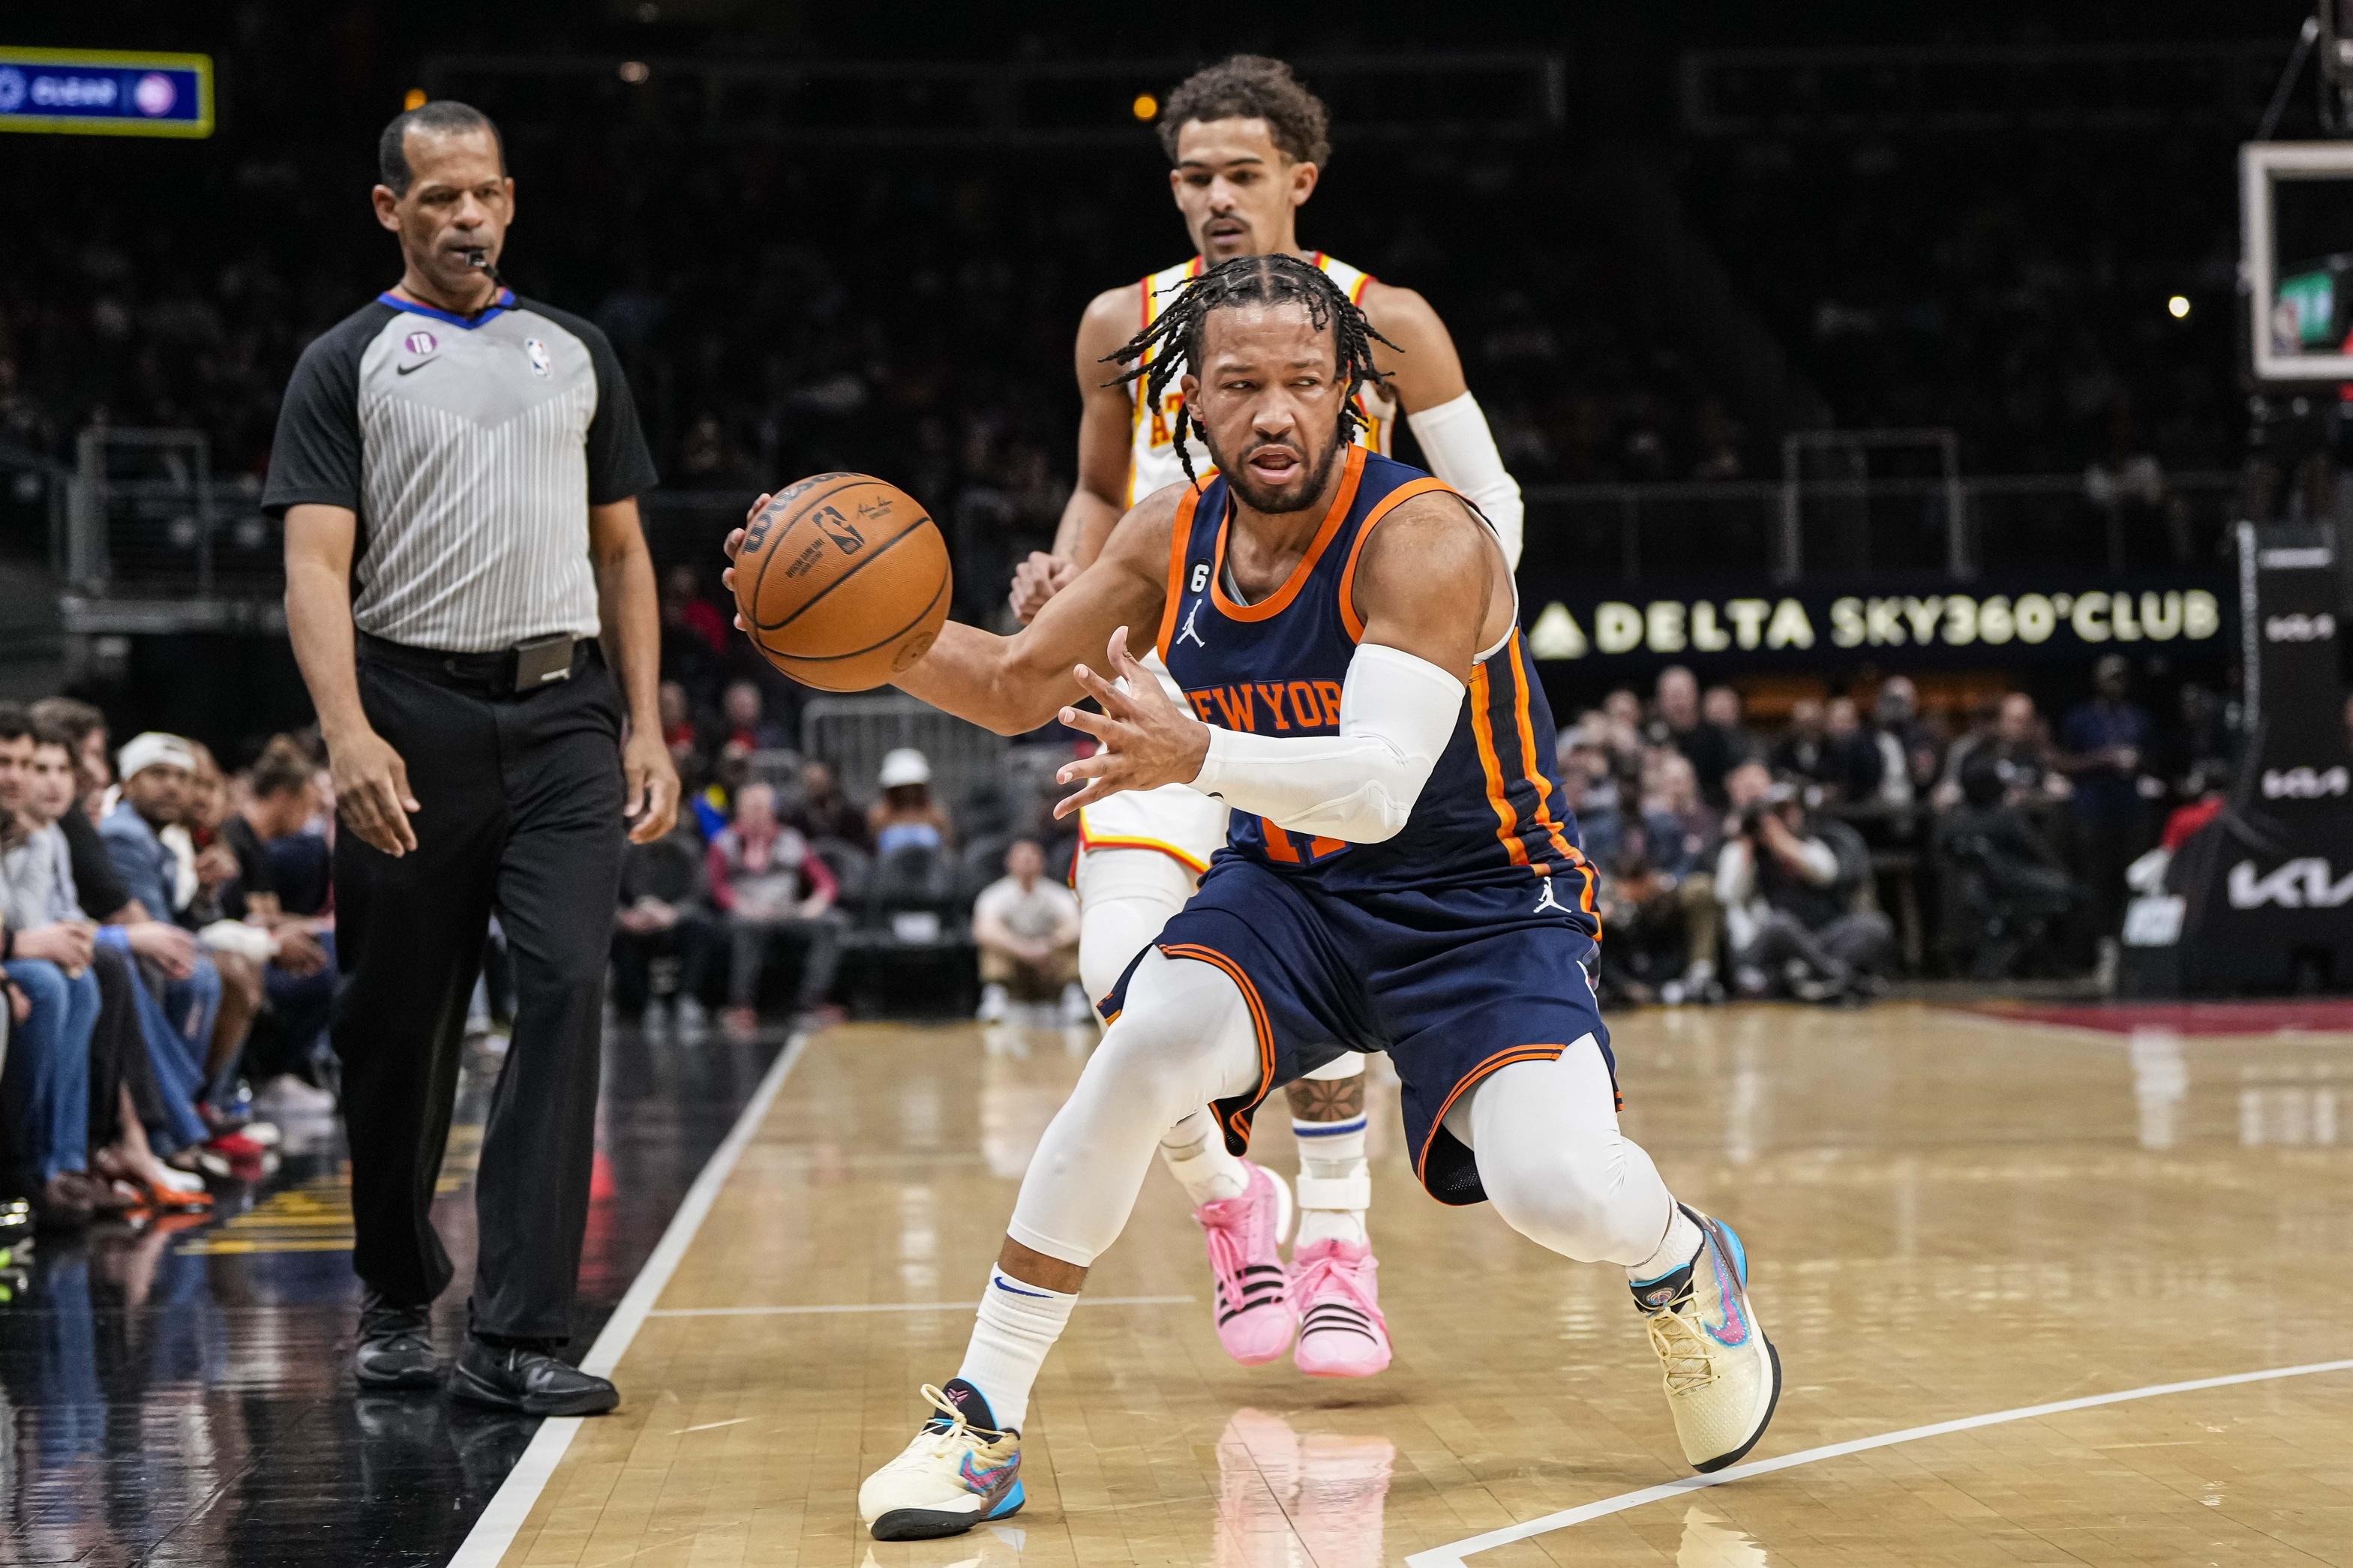 New York Knicks guard Jalen Brunson (11) keeps the ball in bounds behind Atlanta Hawks guard Trae Young (11) during the first half at State Farm Arena. / Dale Zanine-USA TODAY Sports